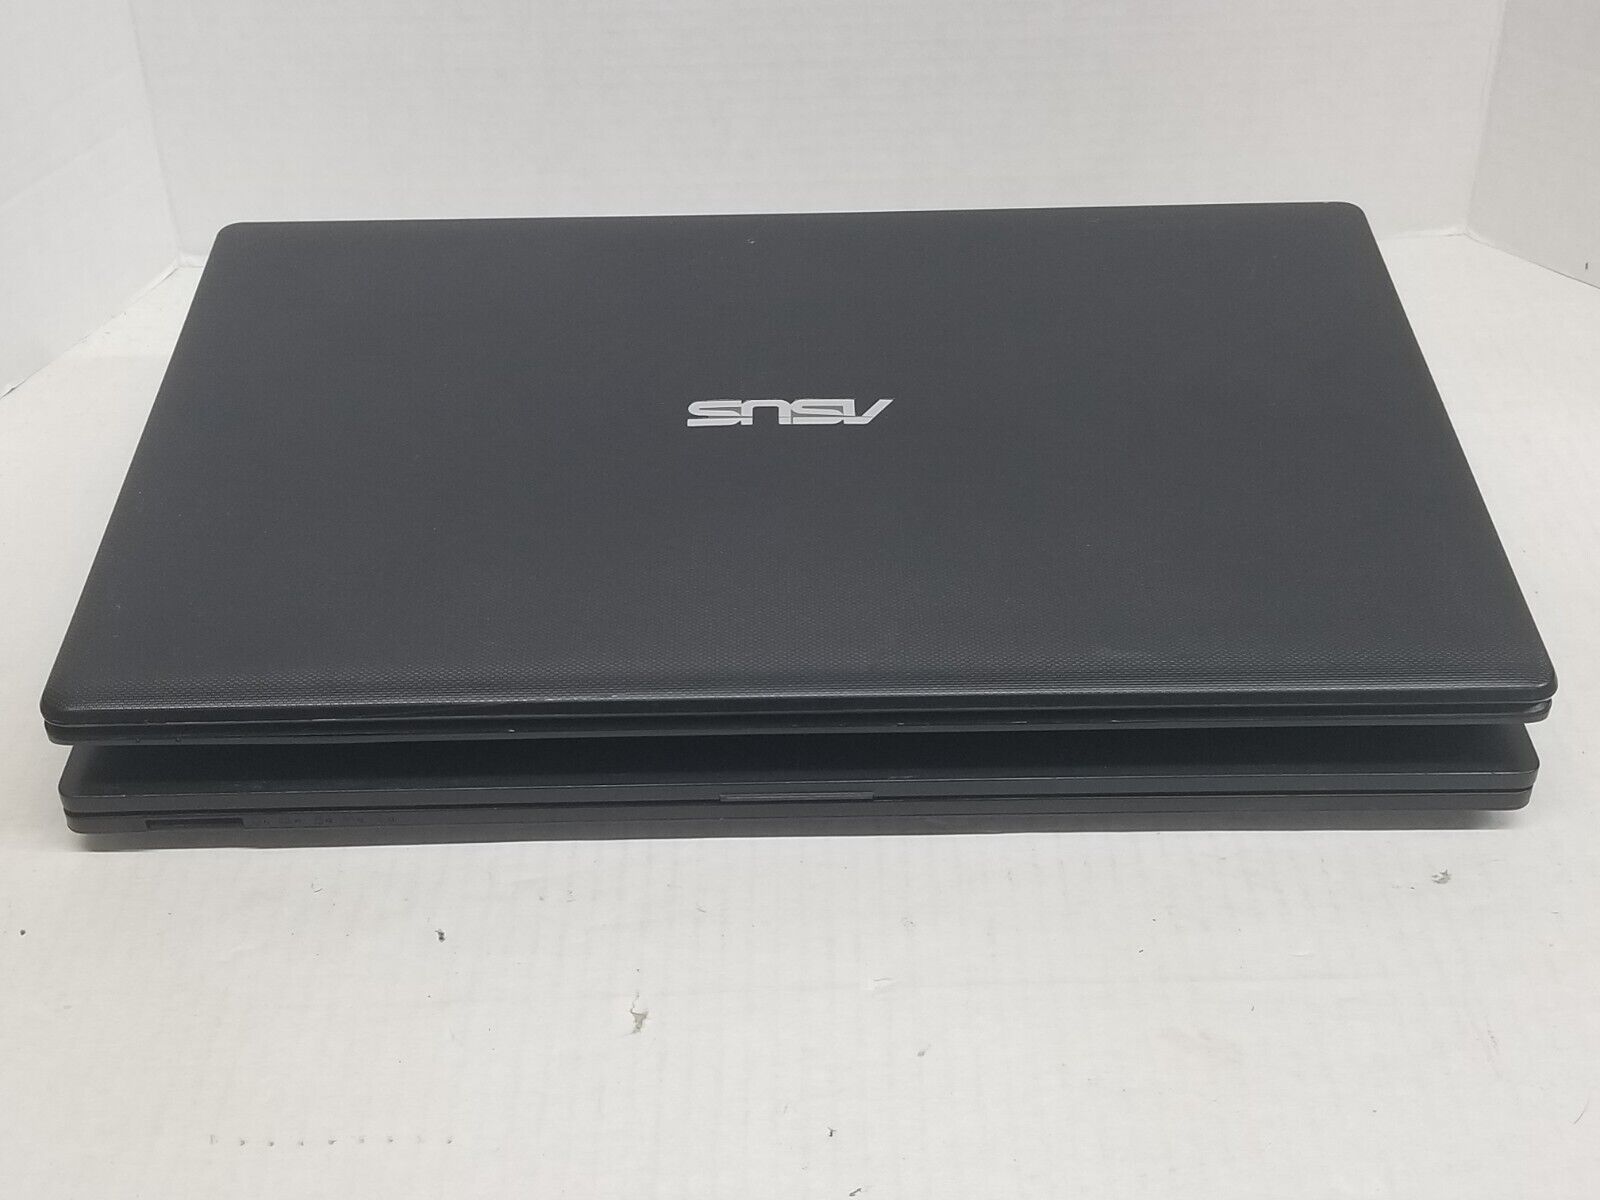 Lot of 2 ASUS Laptops - X551M and 2520L - NO AC